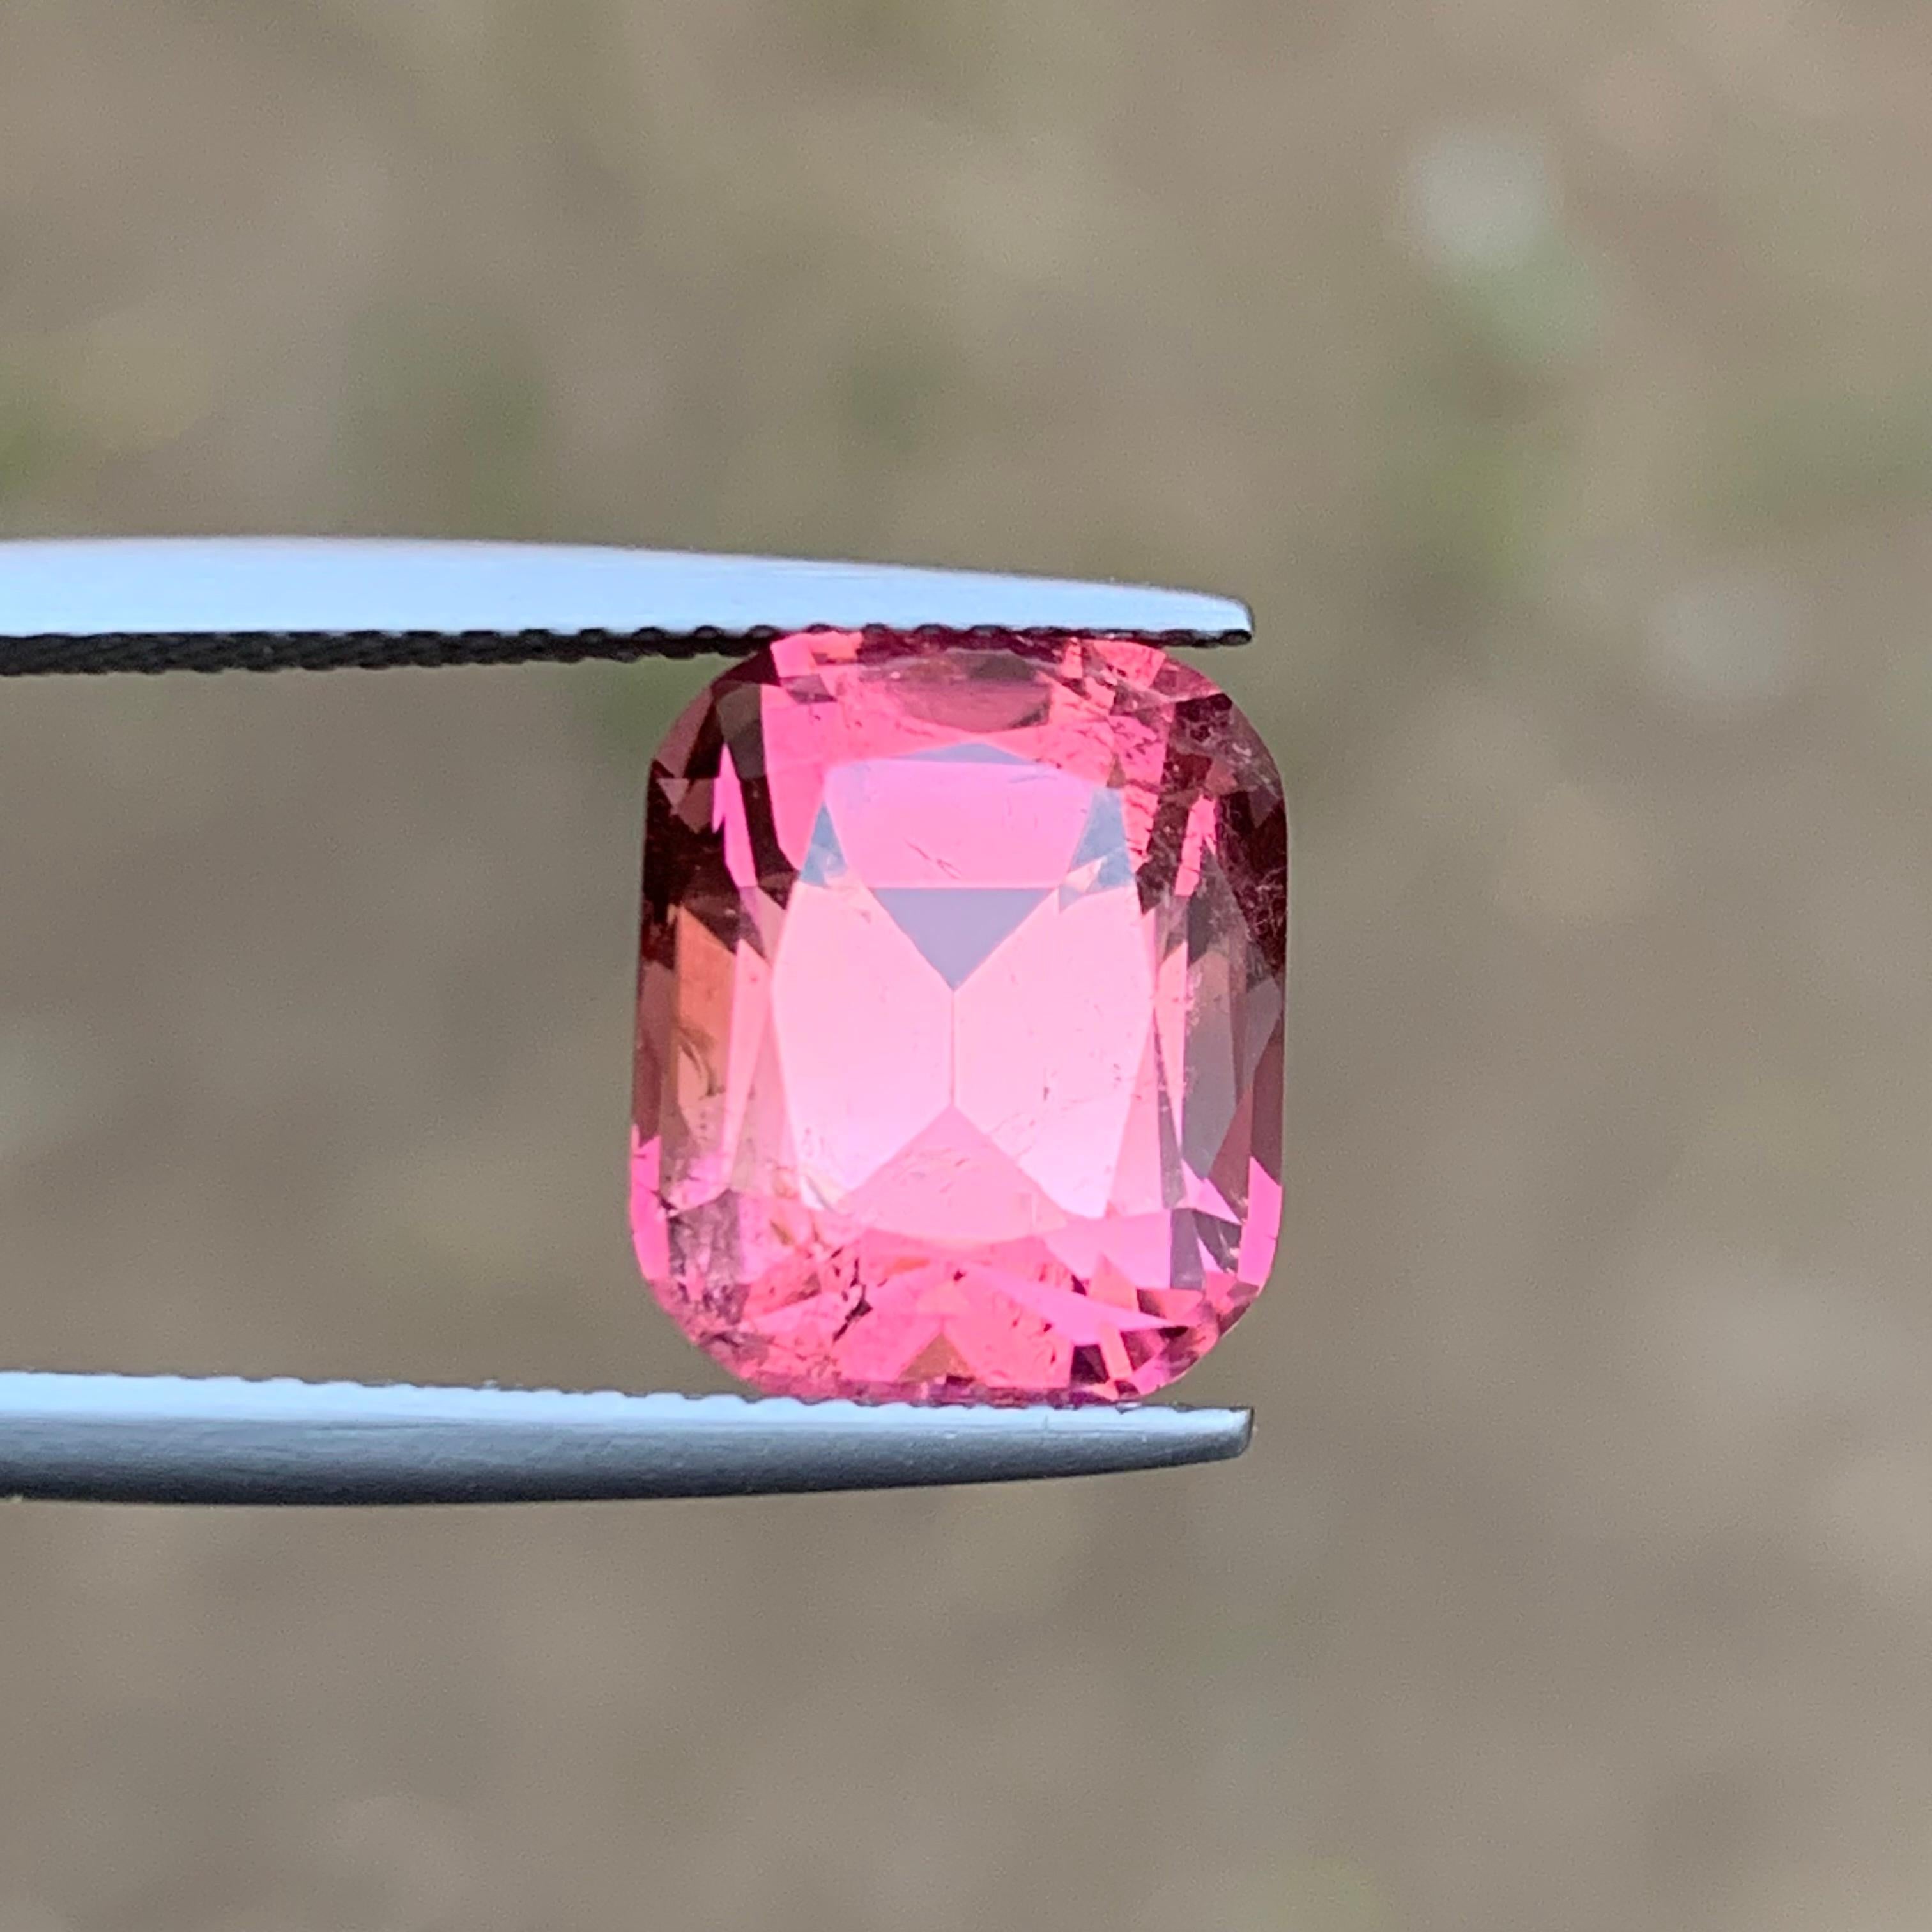 Rare Peachy Pink Natural Tourmaline Gemstone, 7.25 Ct Cushion for Ring/Pendant For Sale 3